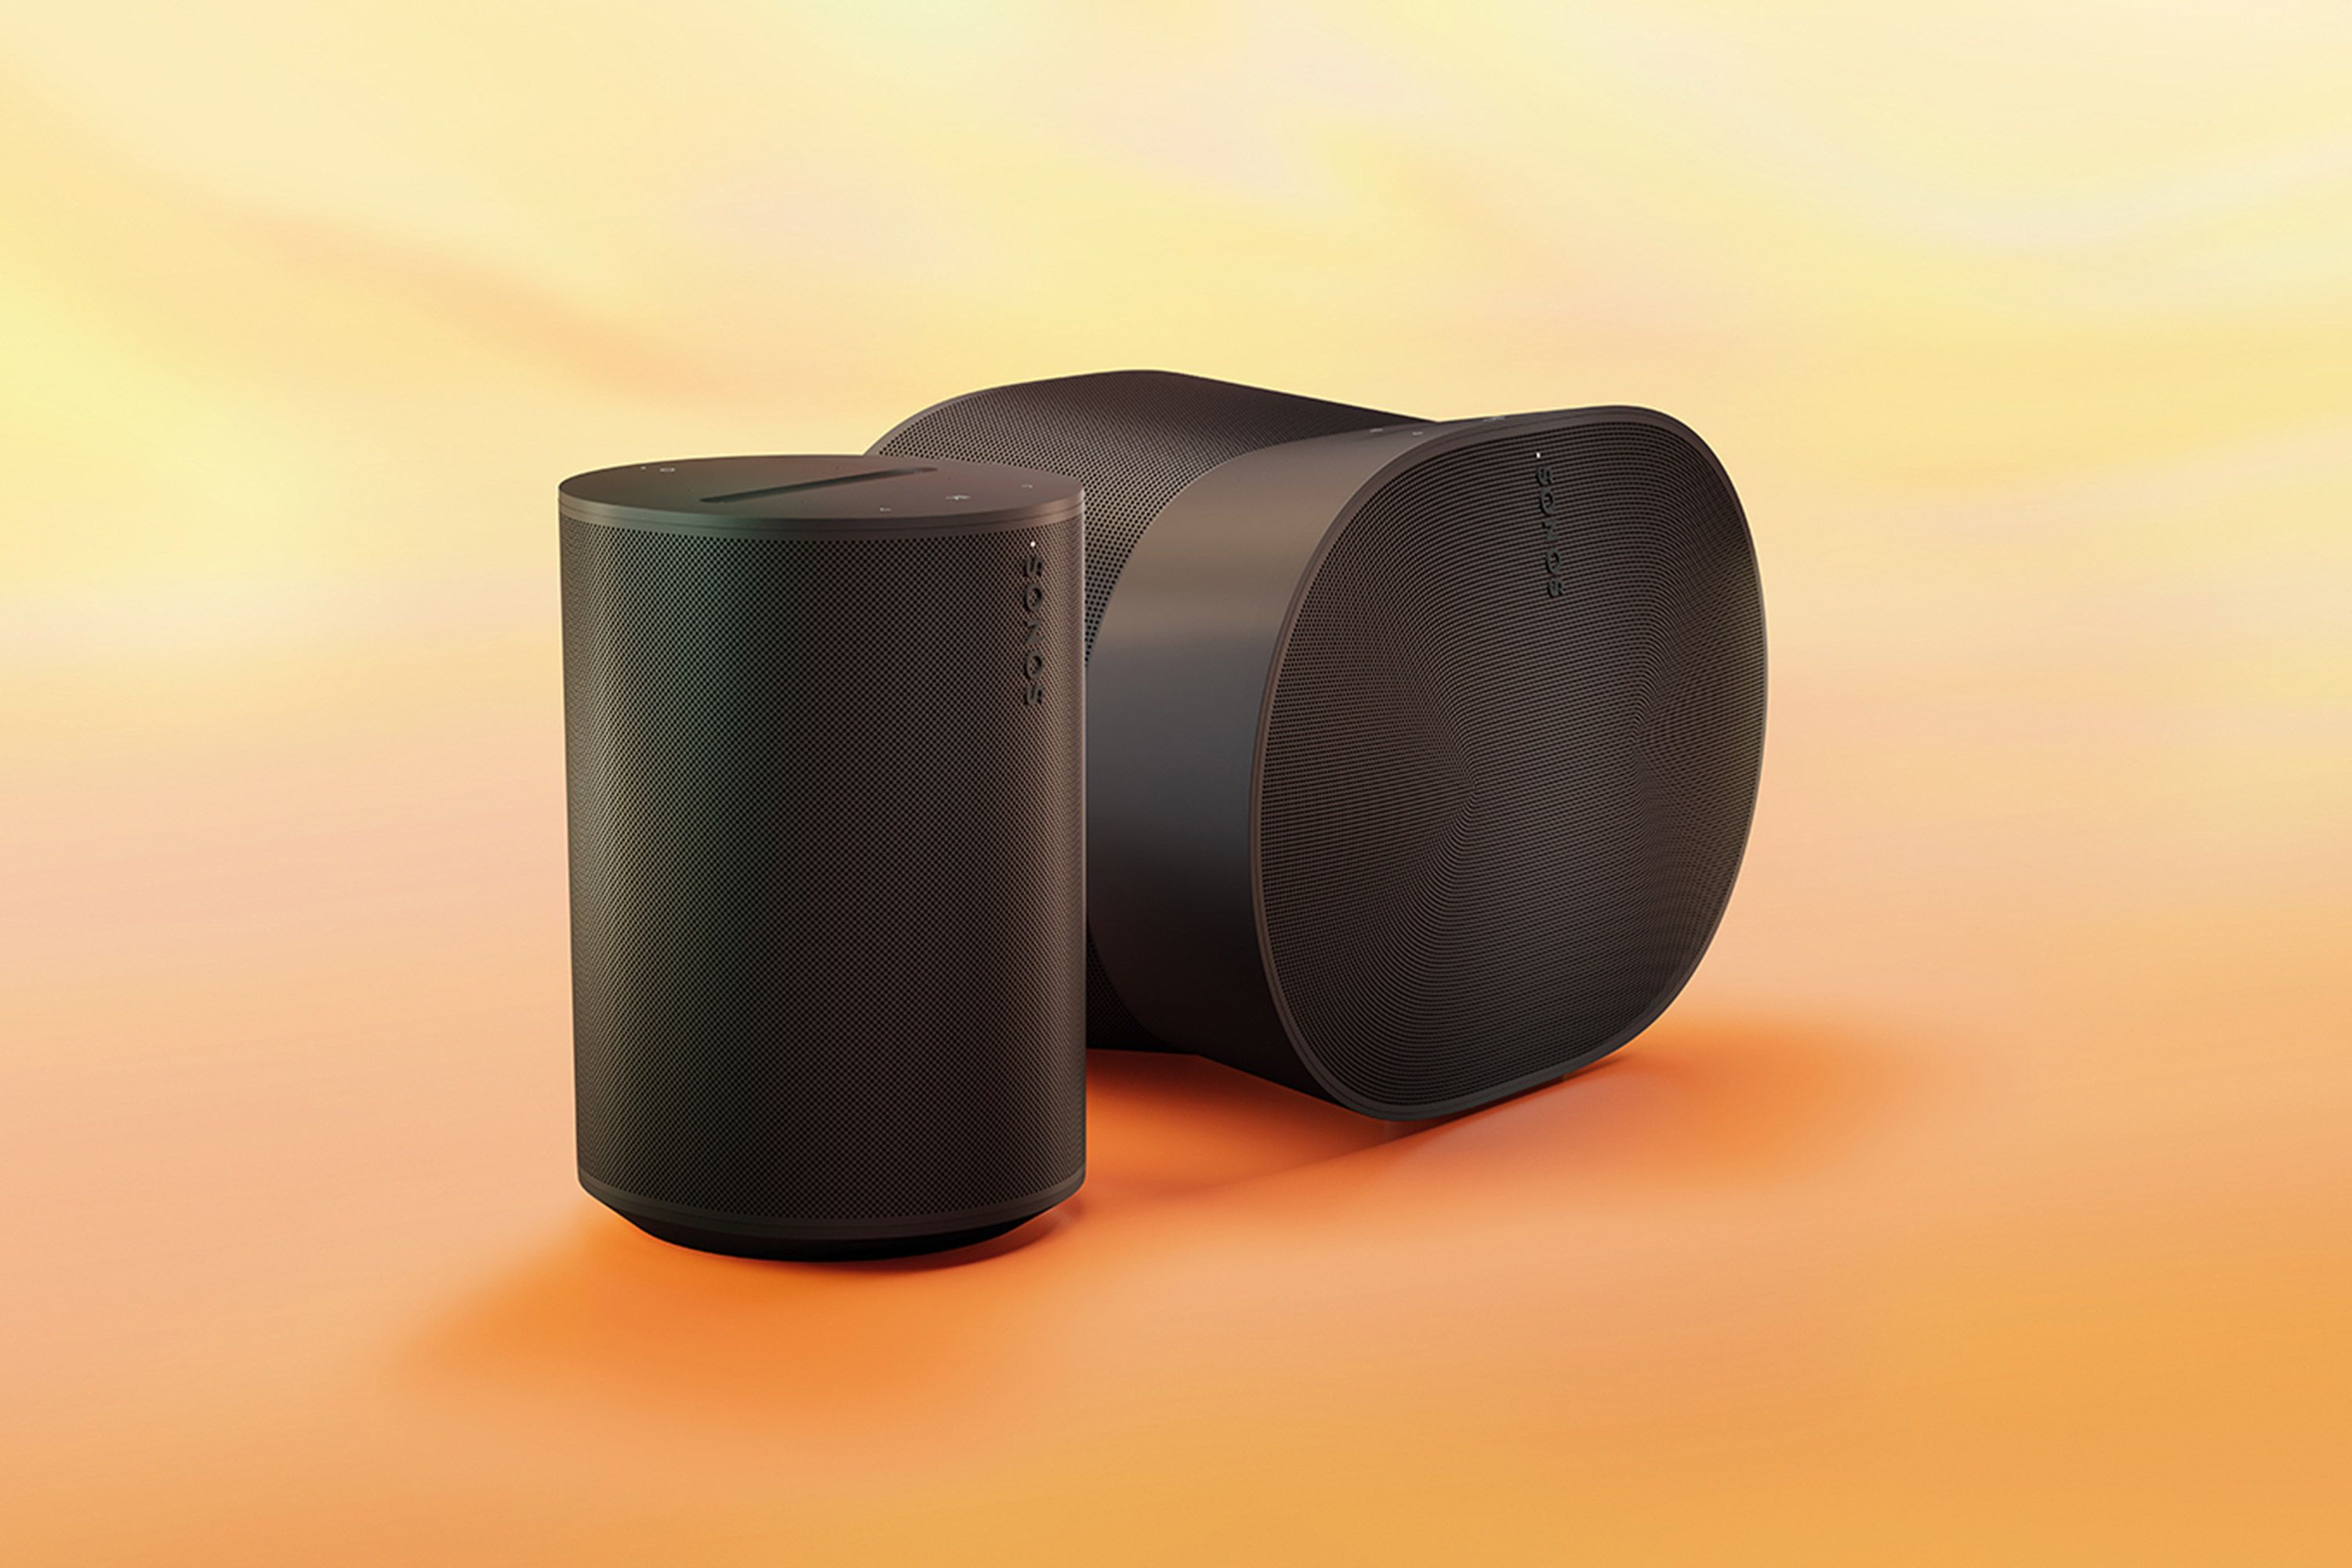 Bage Uden Milepæl What Other Sonos Speakers Will Be Released in 2023?